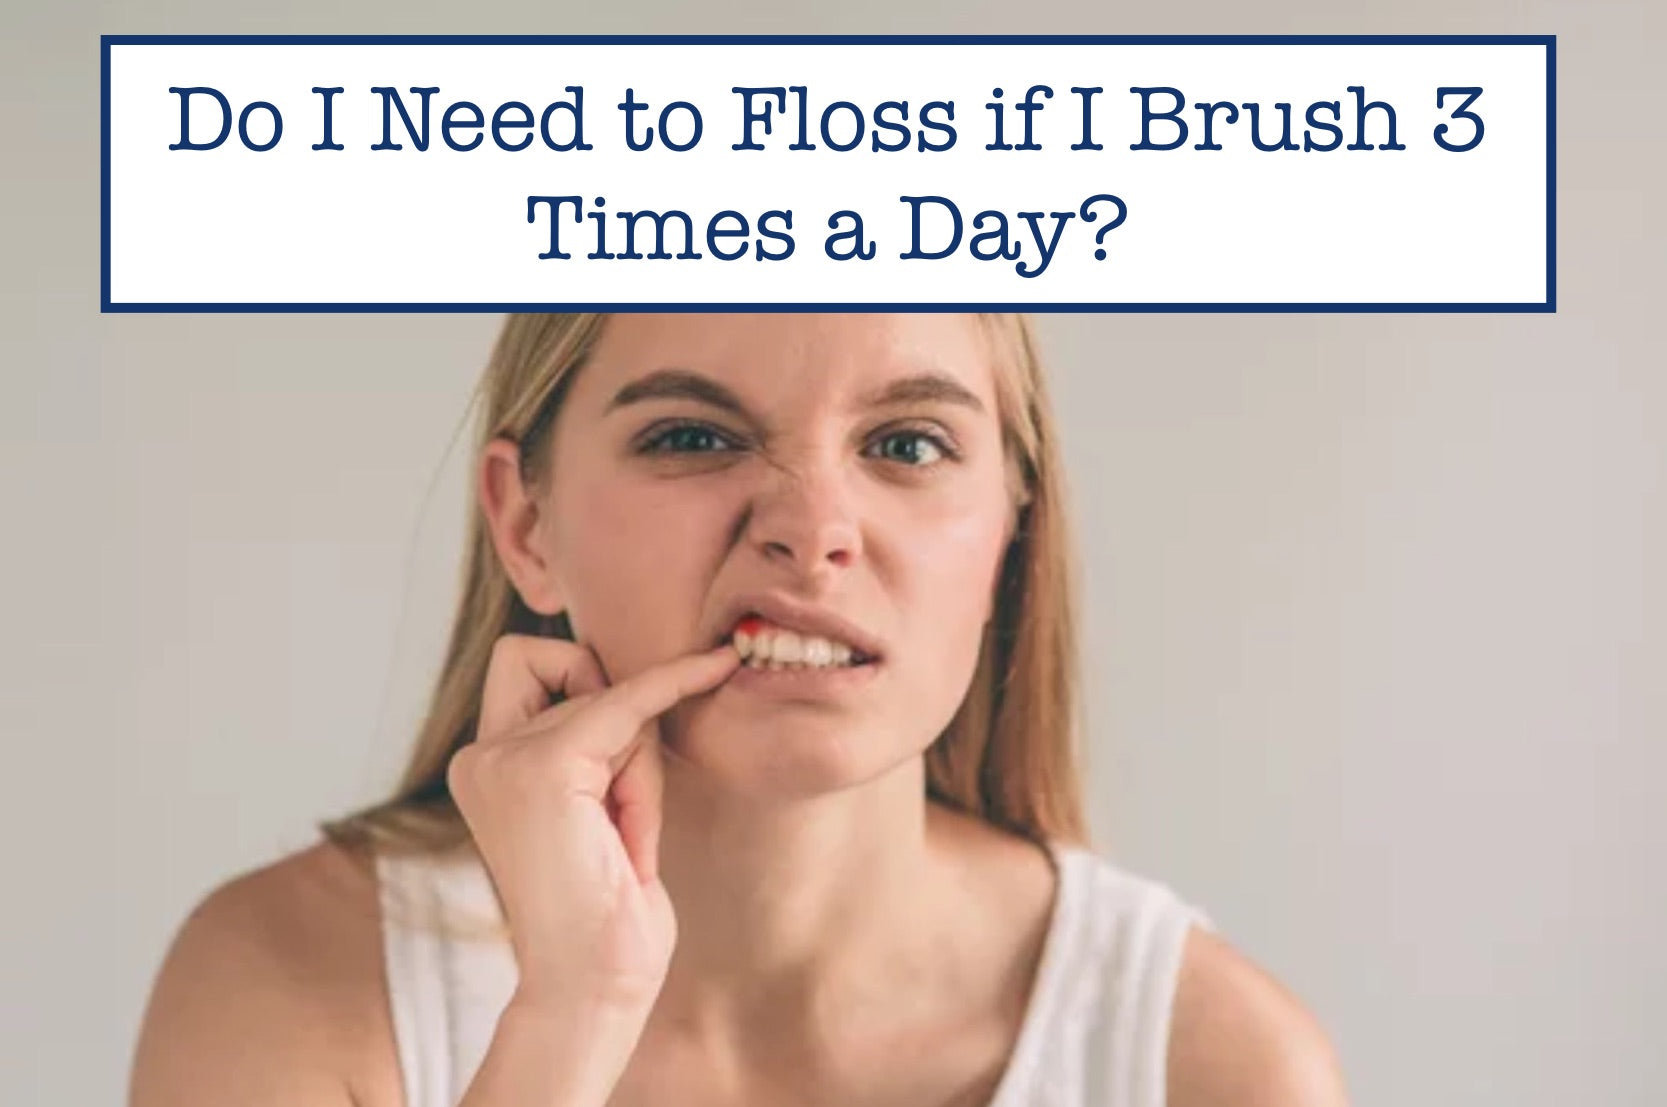 Do I Need to Floss if I Brush 3 Times a Day?